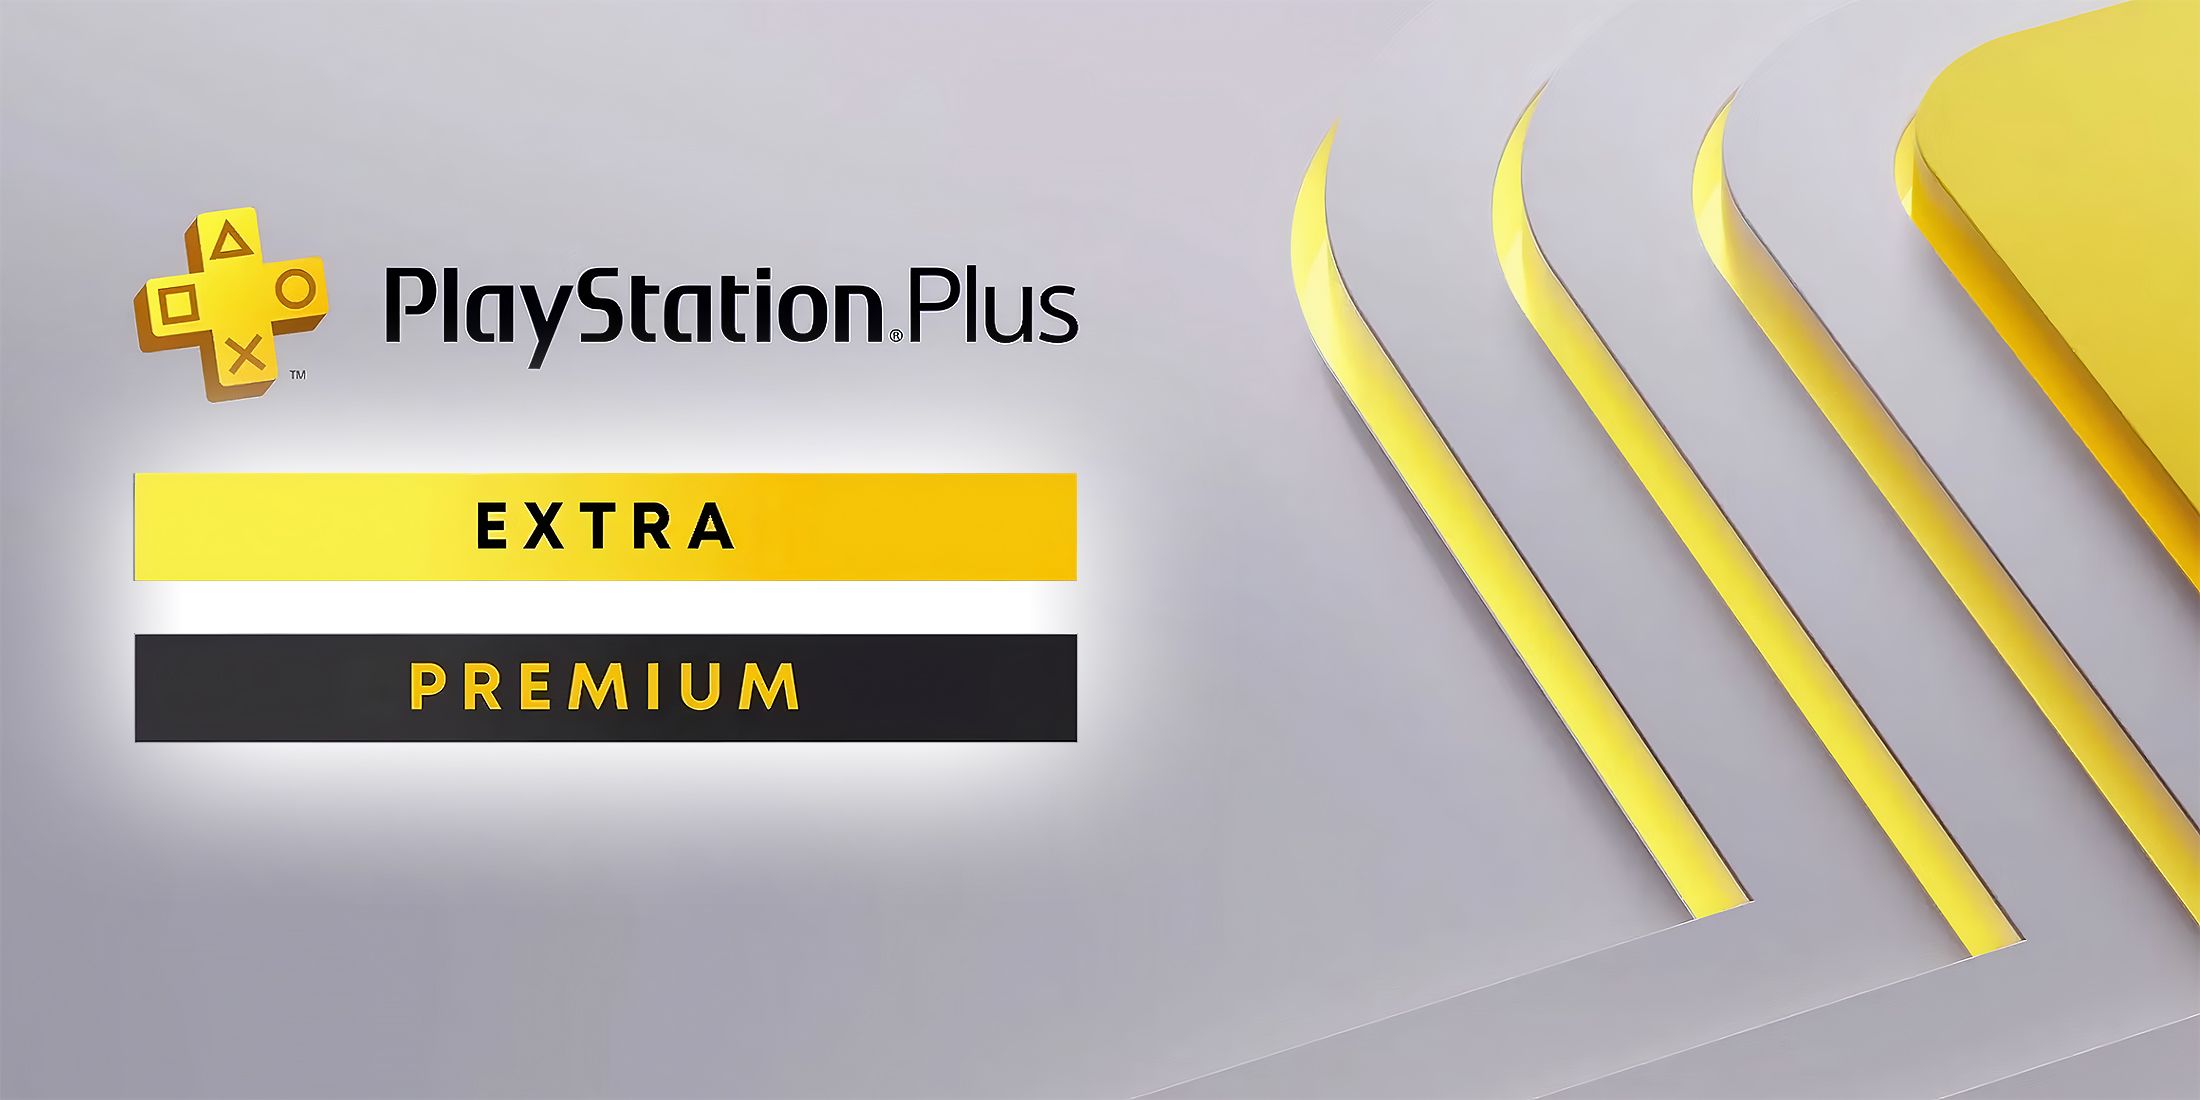 PS Plus with glowing Extra and Premium logos